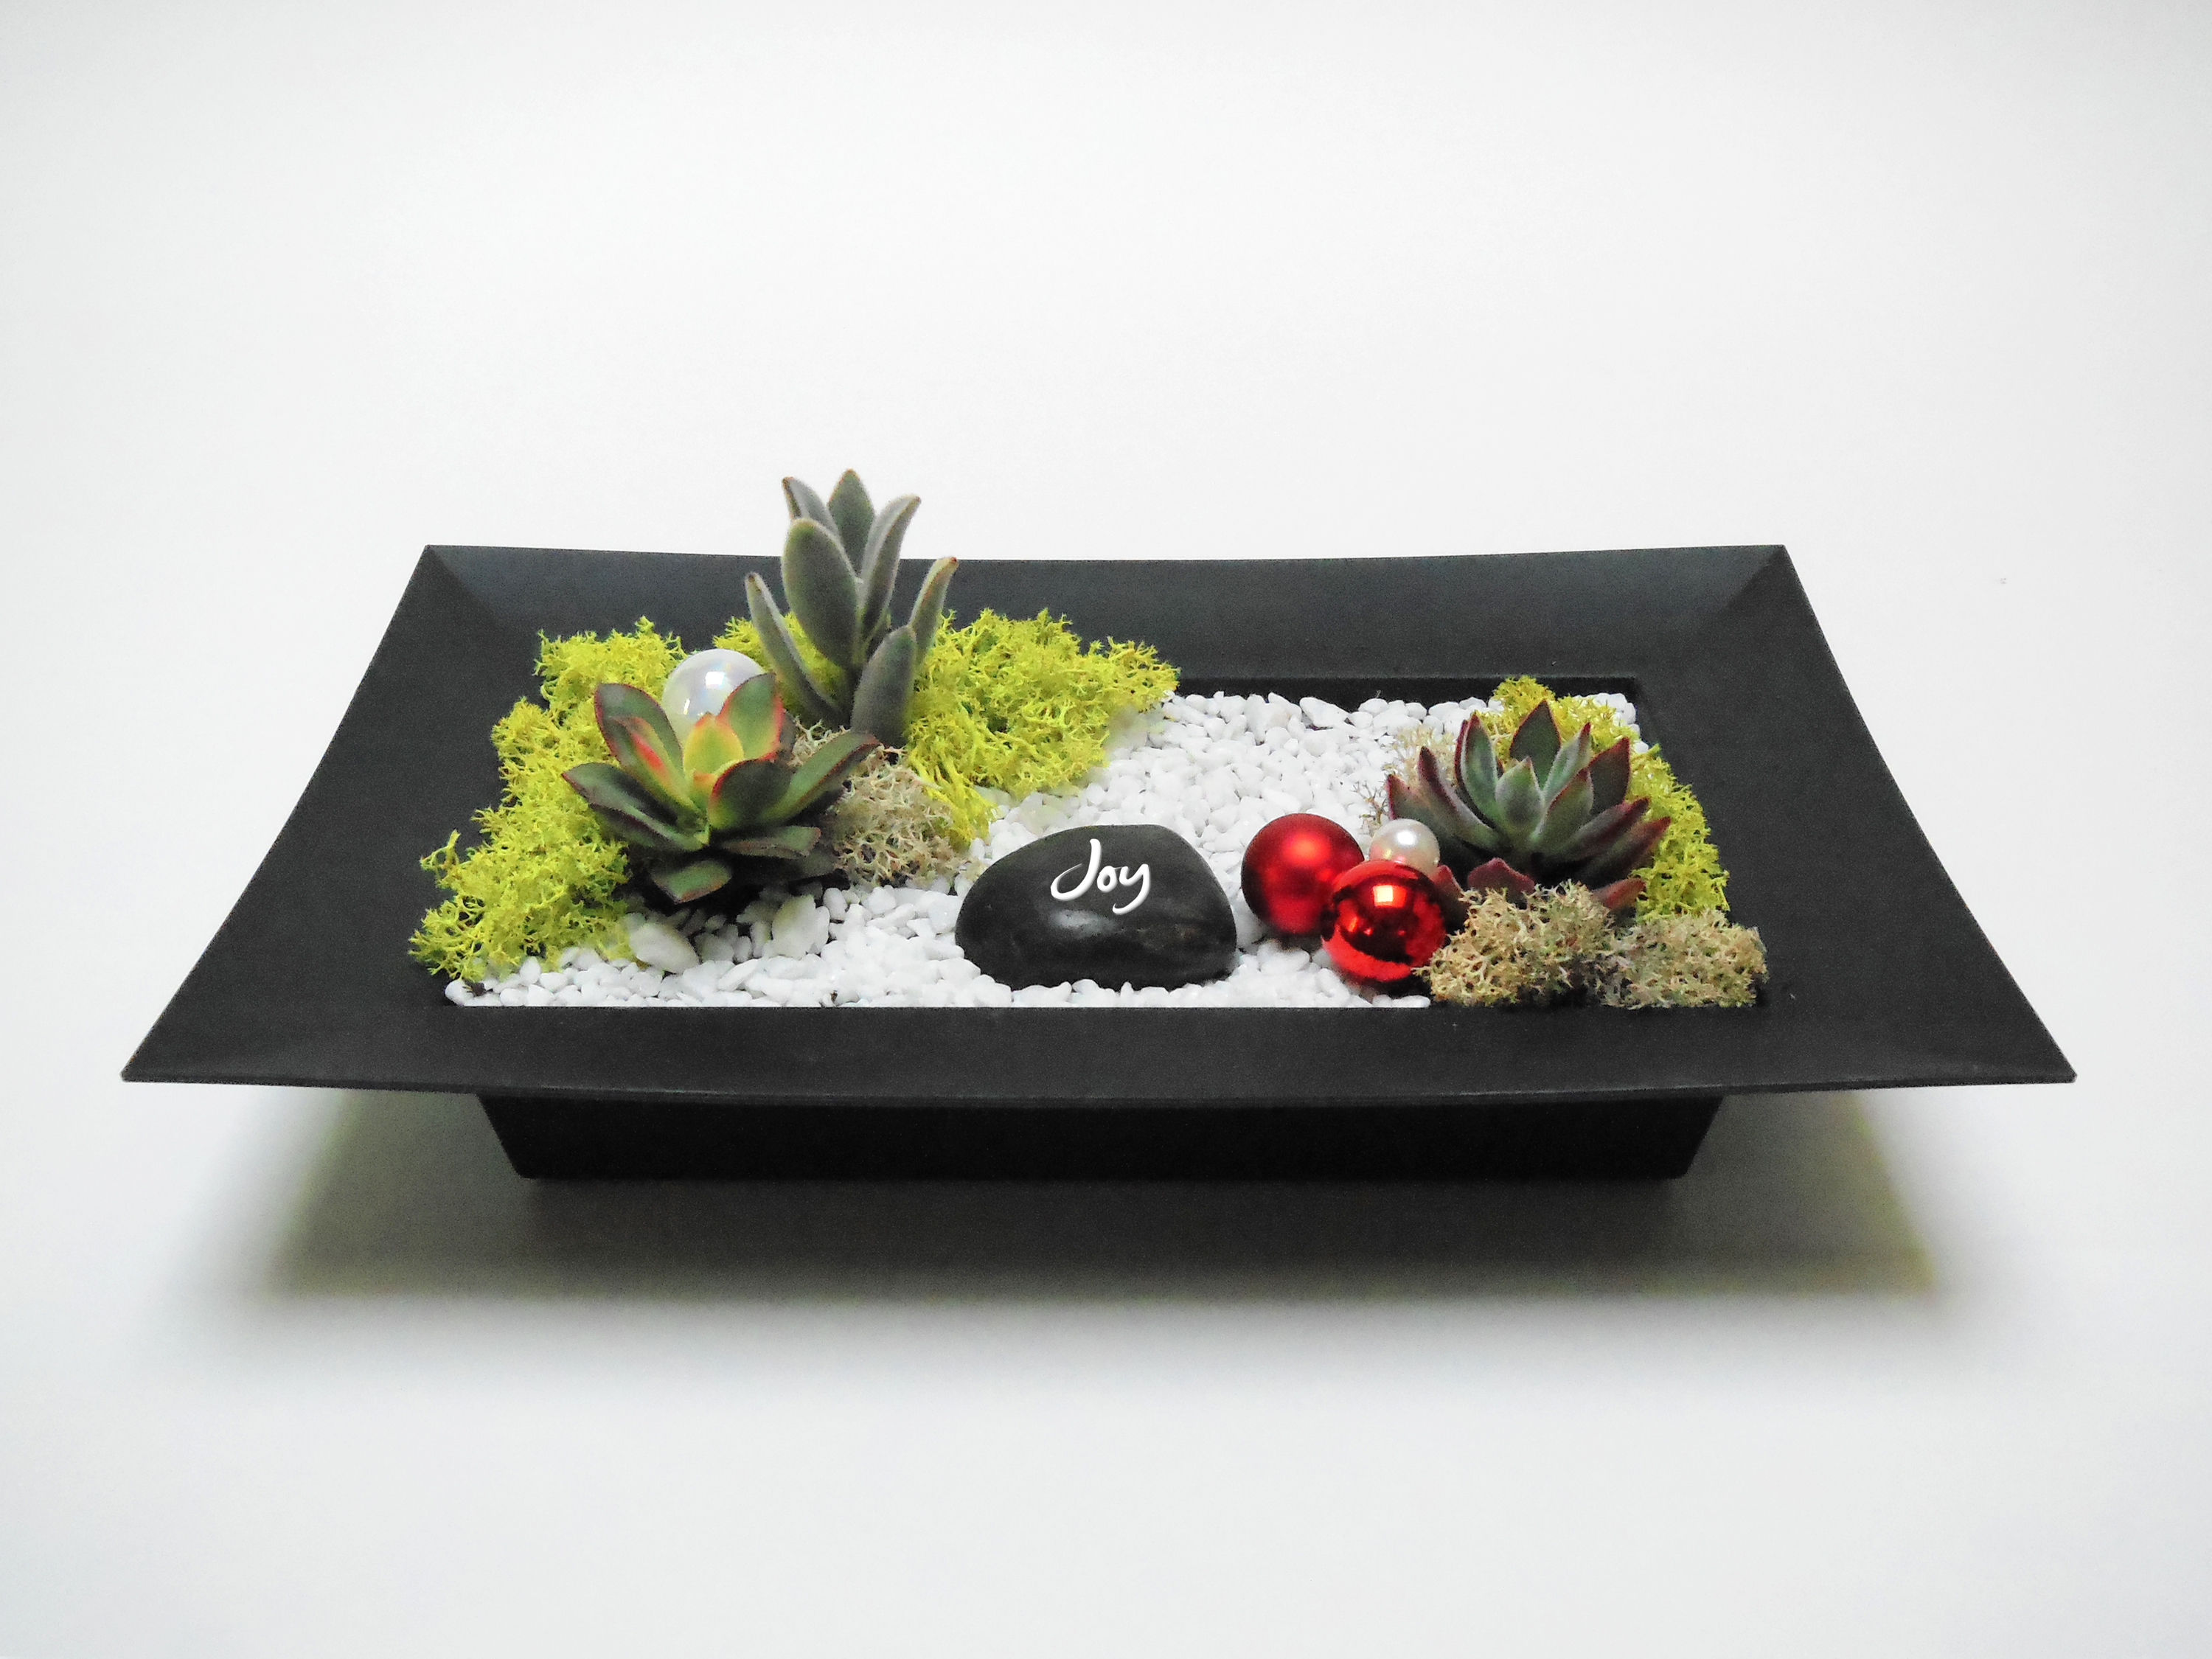 A Holiday Joy  Tray Planter plant nite project by Yaymaker